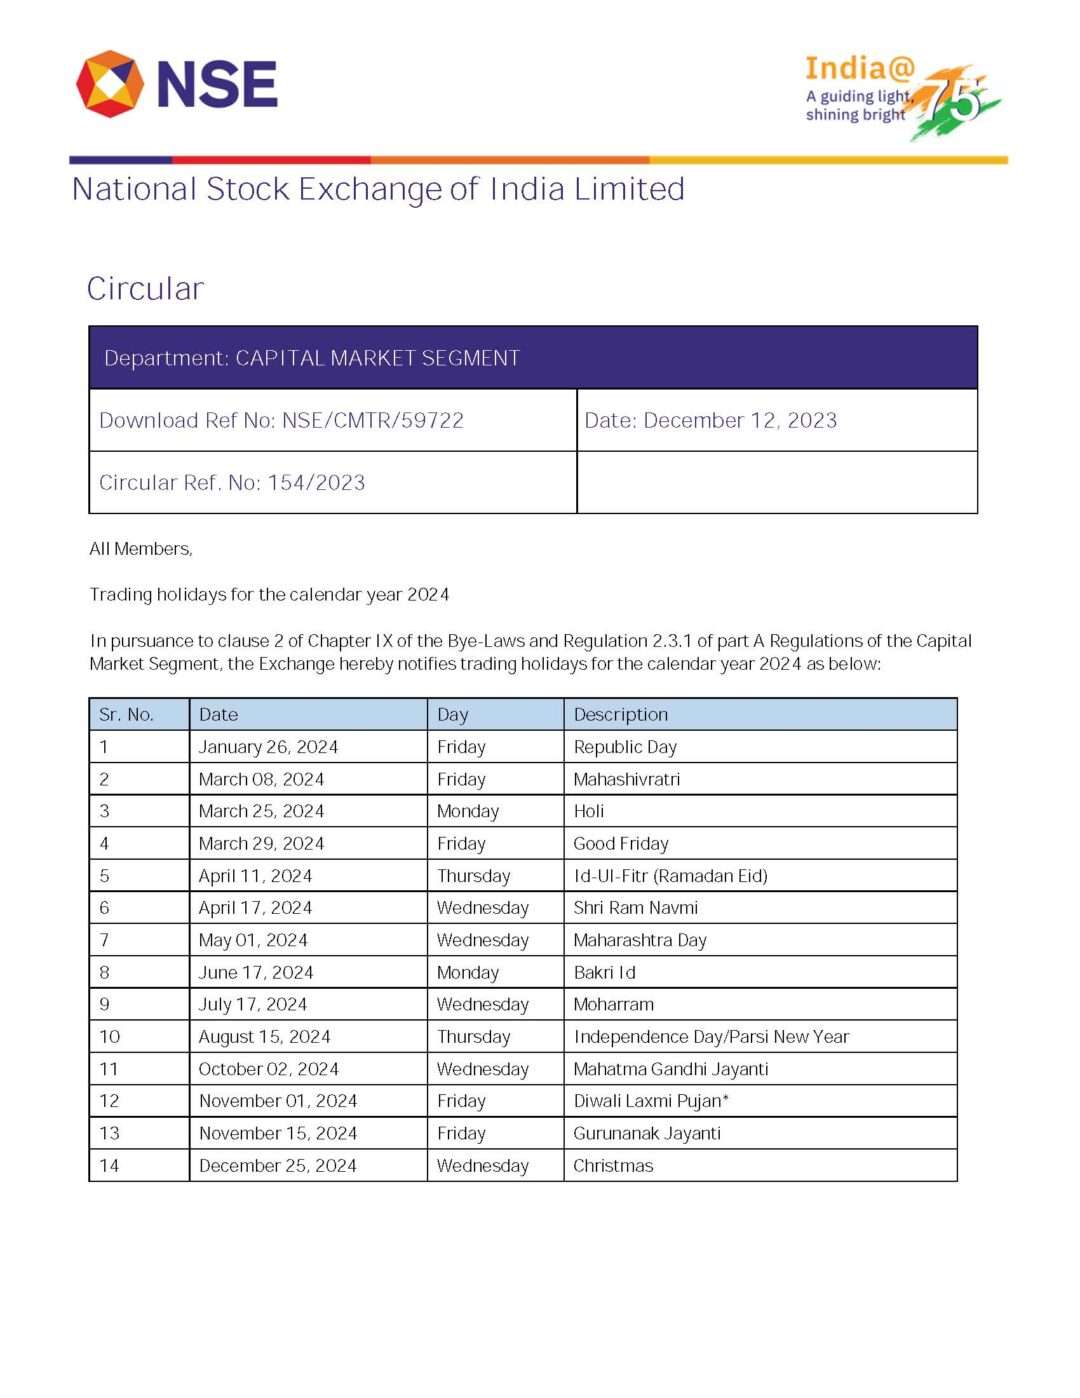 NSE Holiday List 2024